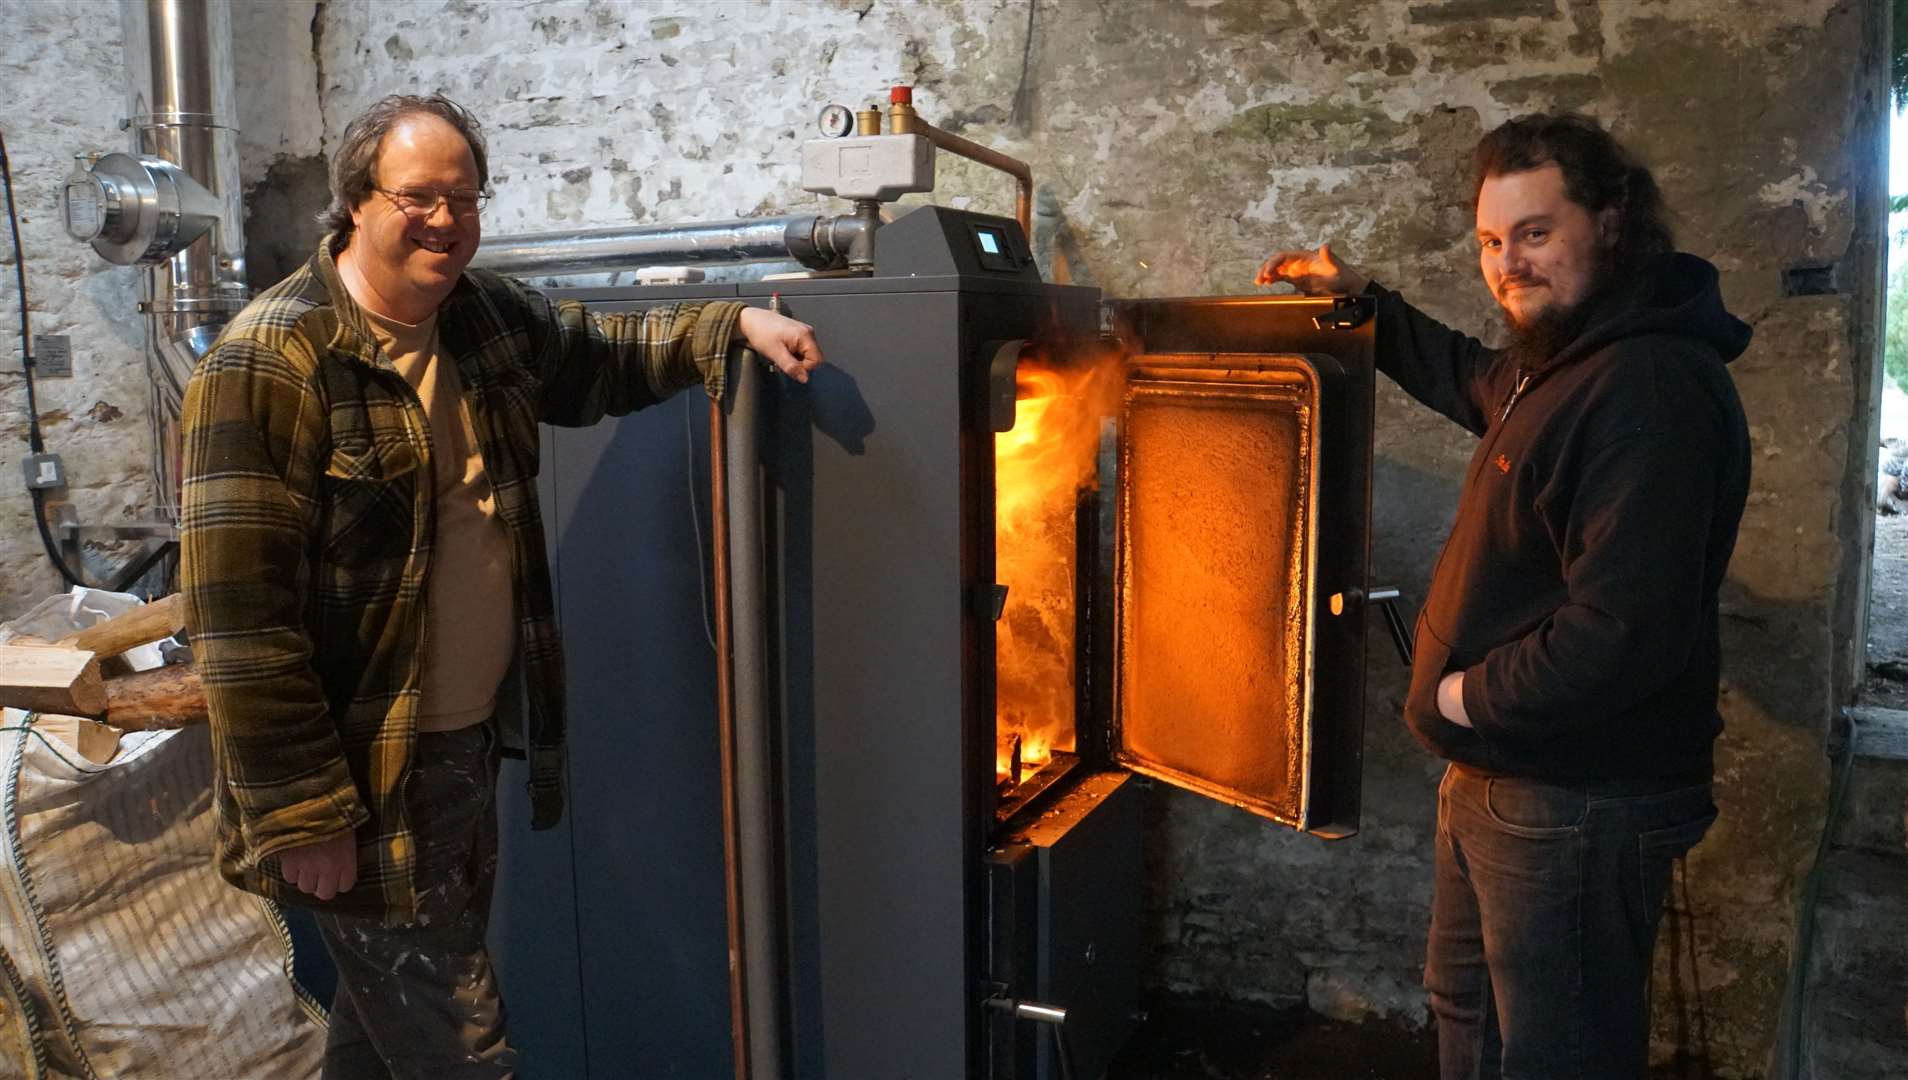 Jason Watts, left, feeds the biomass burner along with his daughter’s partner Andy Sheales.